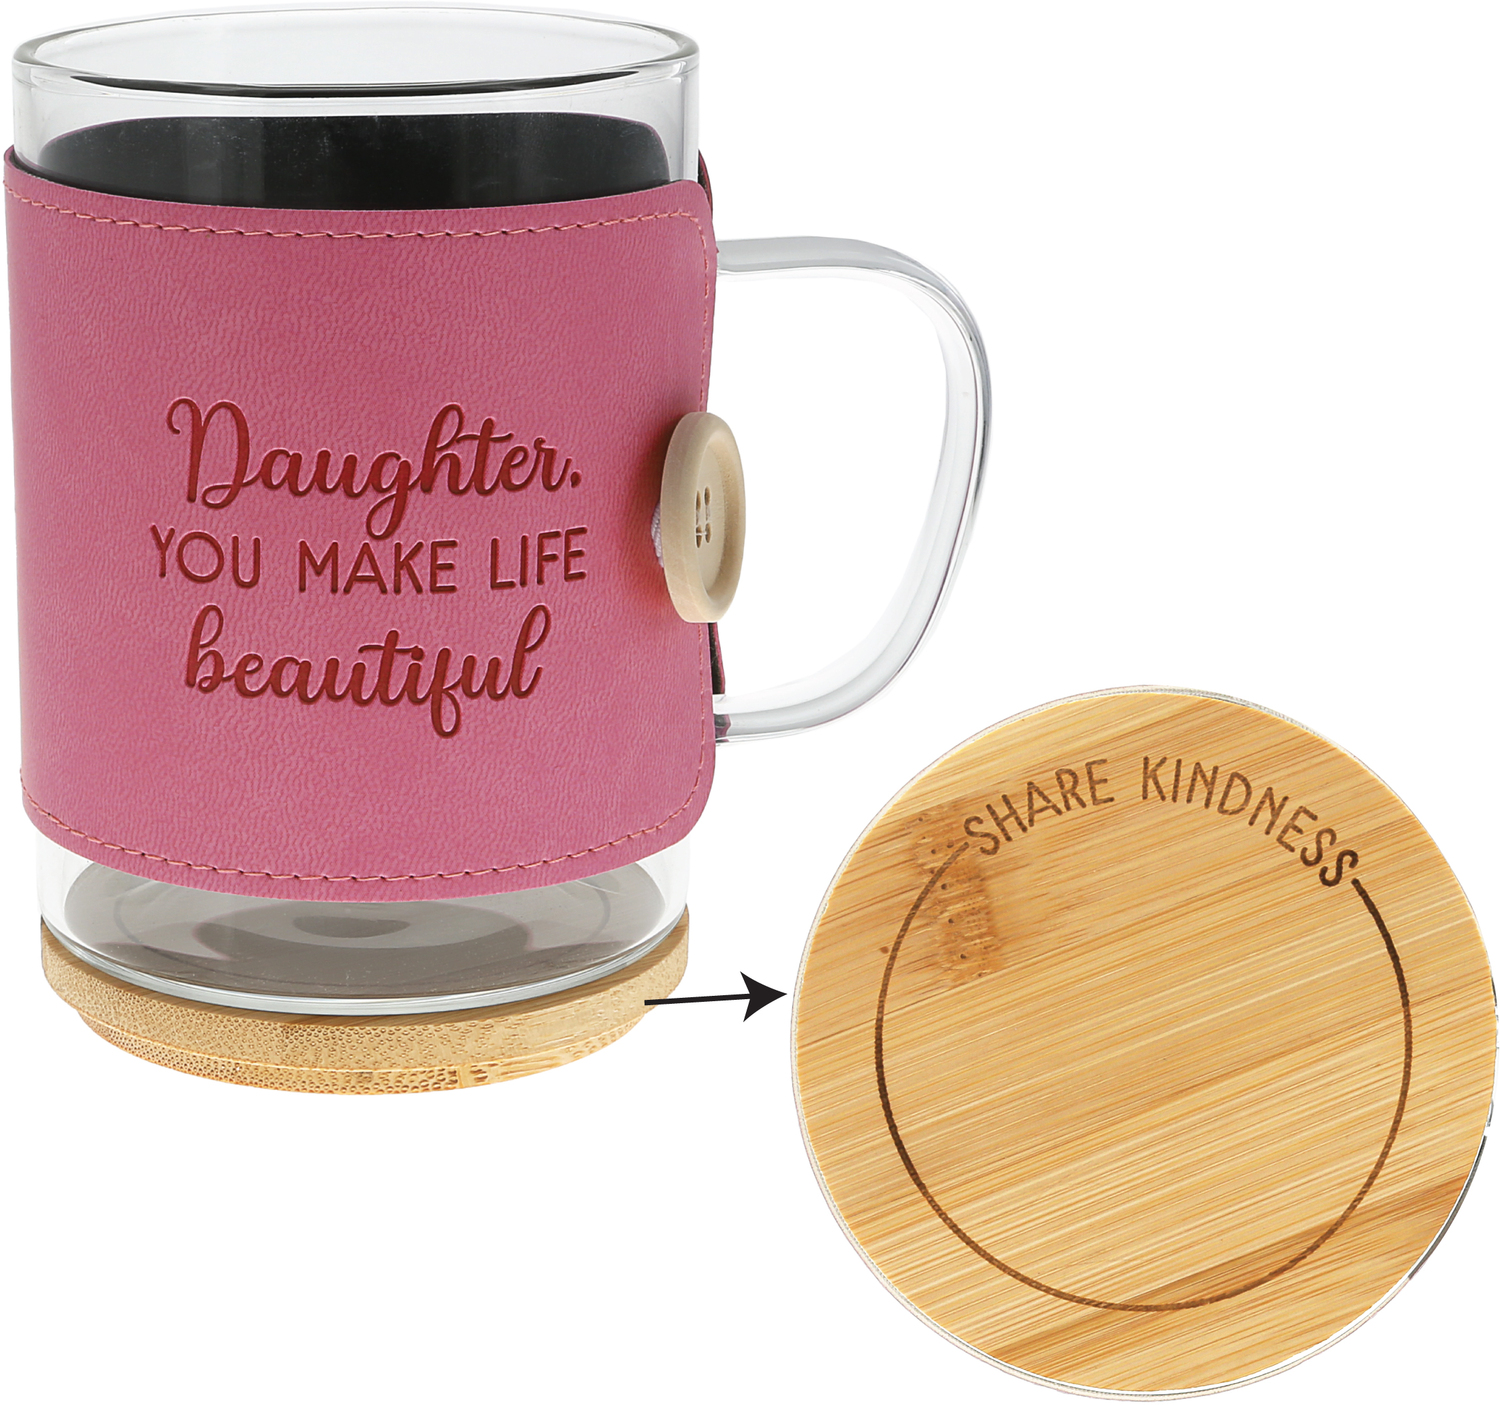 Daughter by Wrapped in Kindness - Daughter - 16 oz Wrapped Glass Mug with Coaster Lid